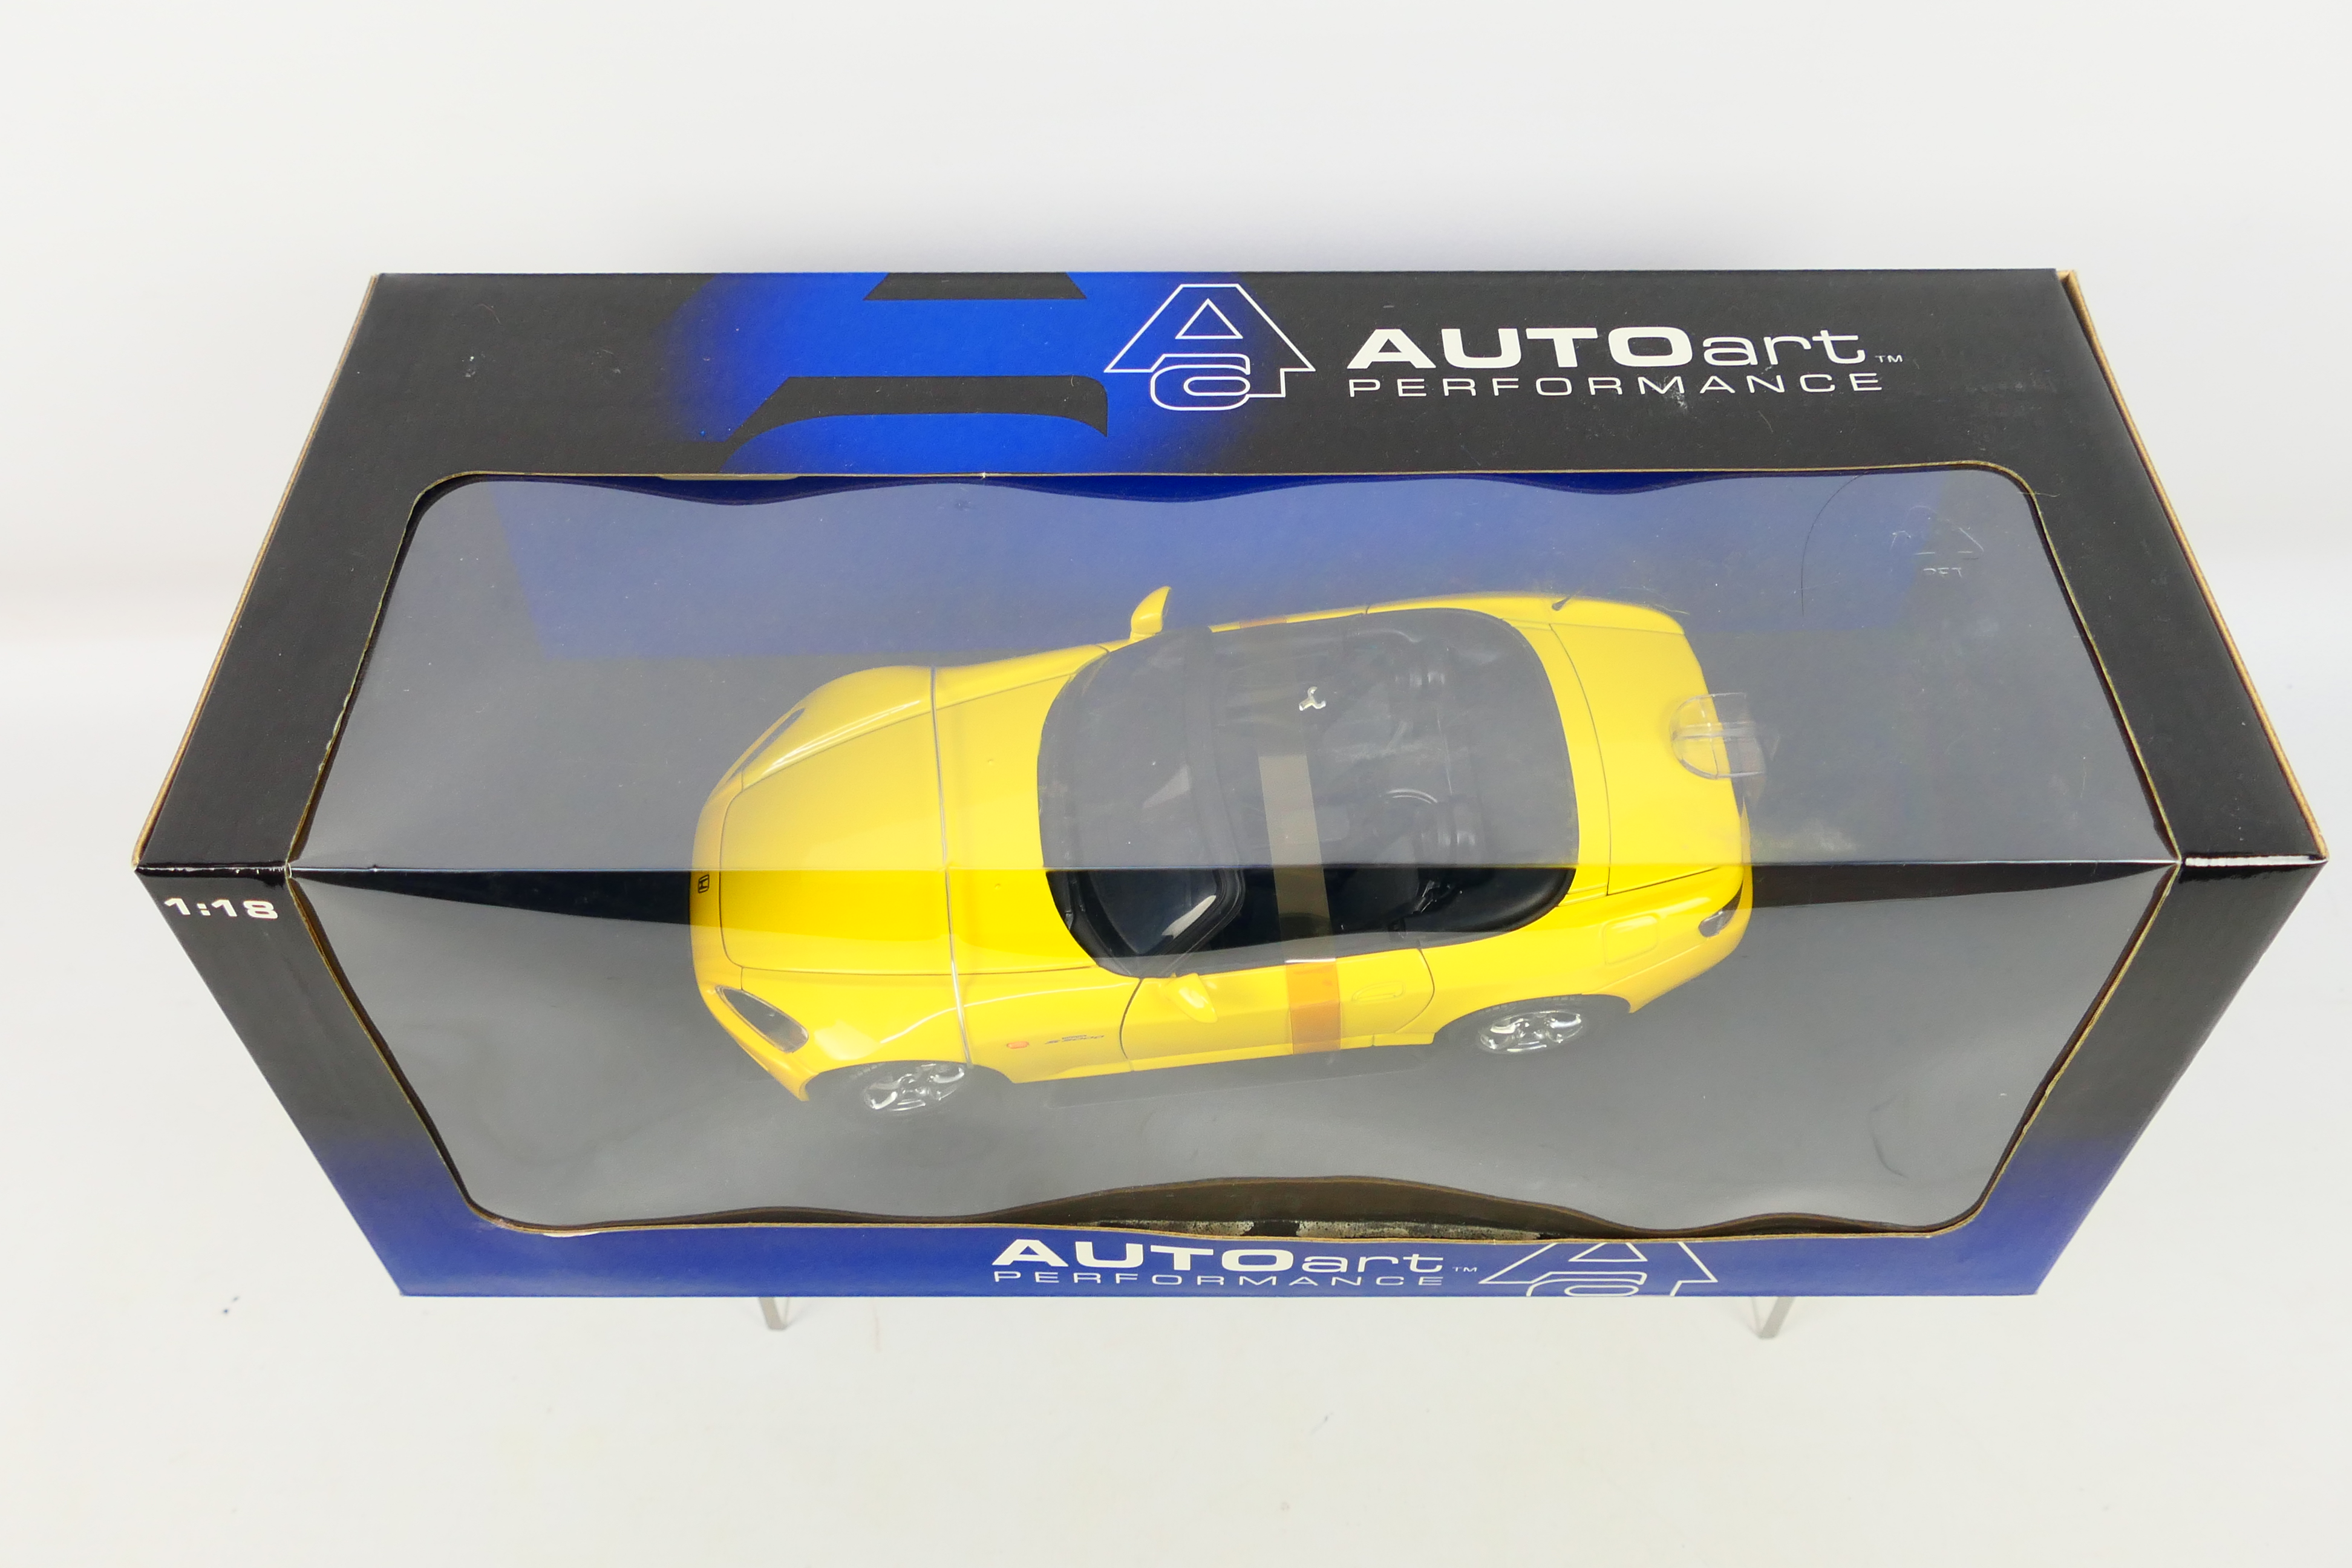 Auto Art - A boxed 1:18 scale Auo Art #727644 Honda S2000. - Image 3 of 3